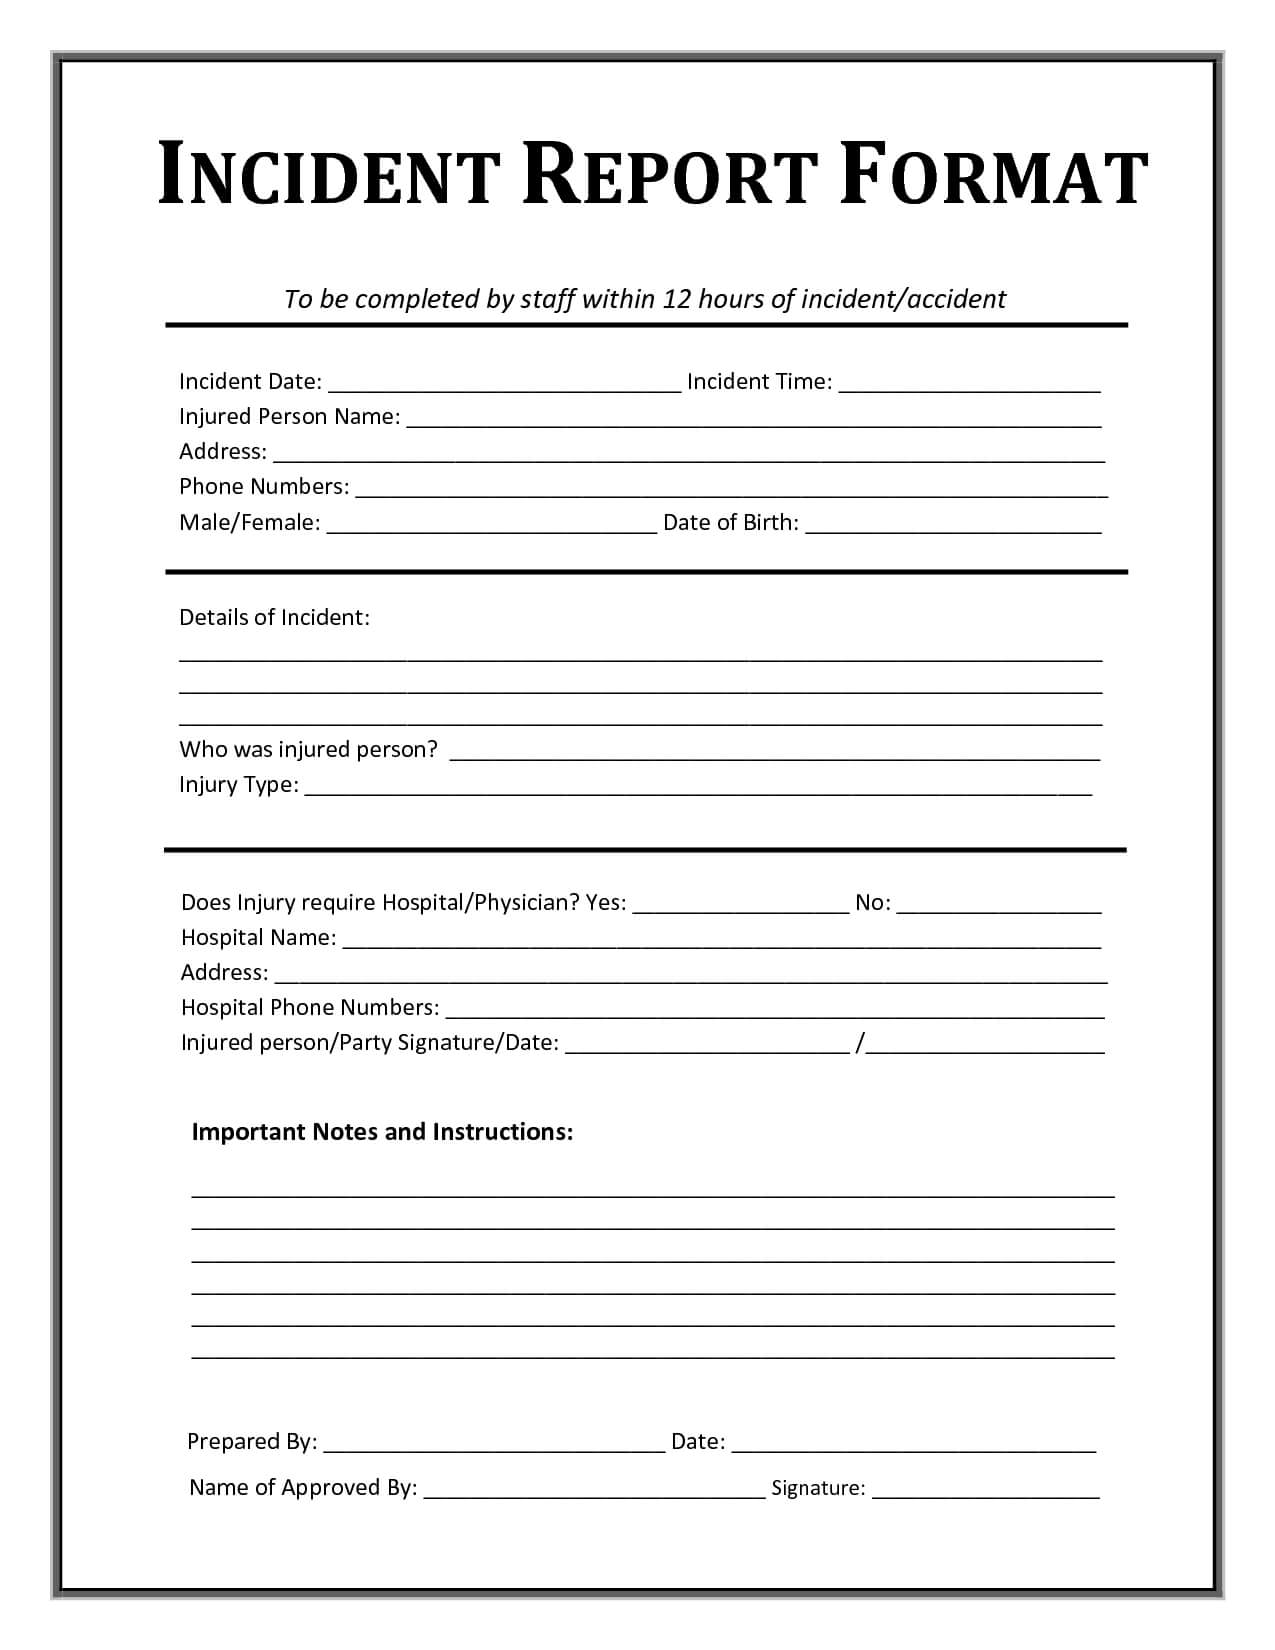 Incident Report Template | Incident Report Form, Incident In Incident Report Form Template Word